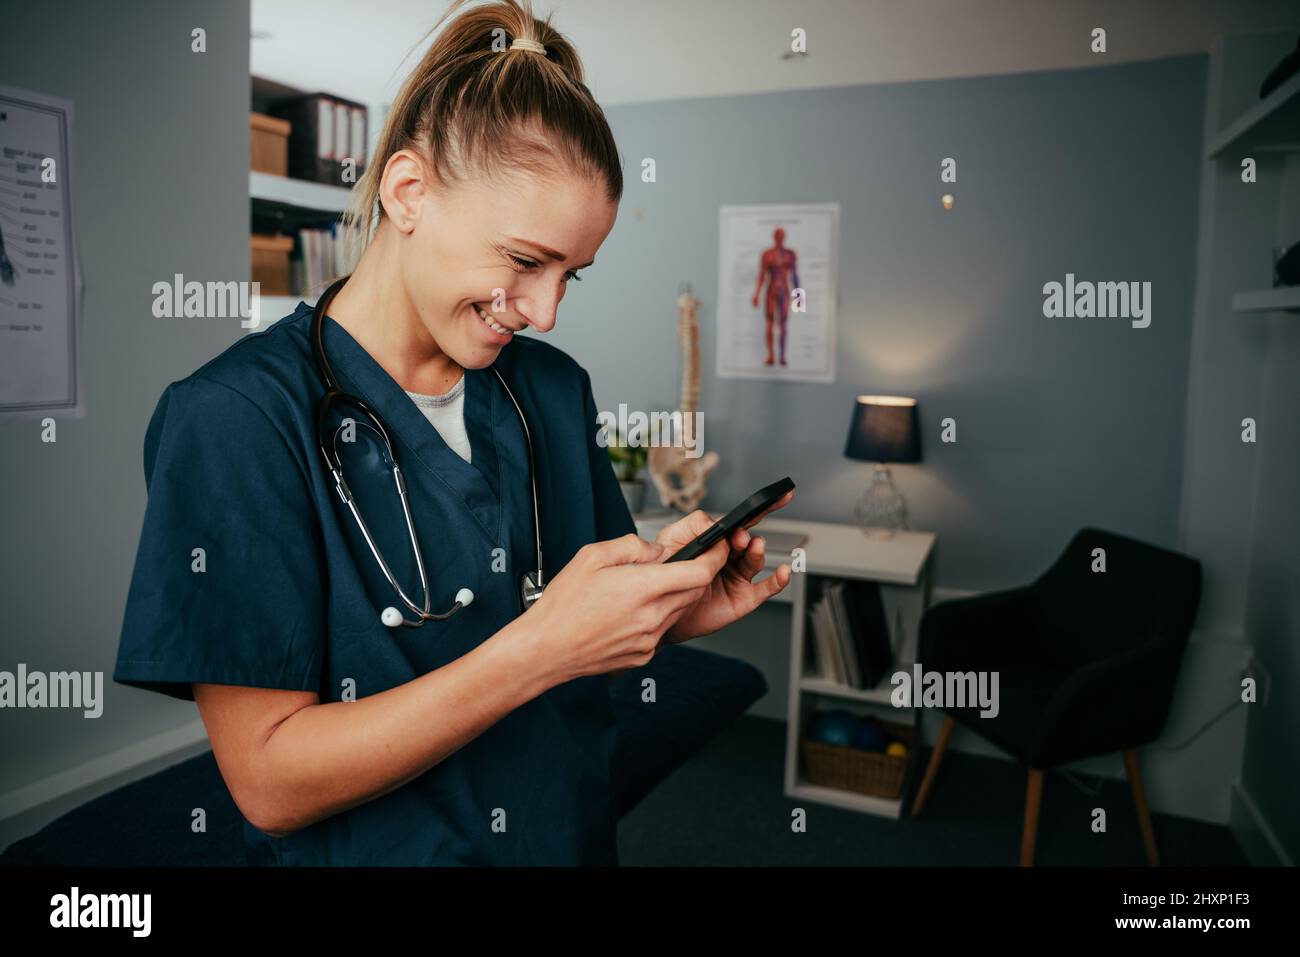 Caucasian female nurse typing on cellular device standing in doctors office Stock Photo